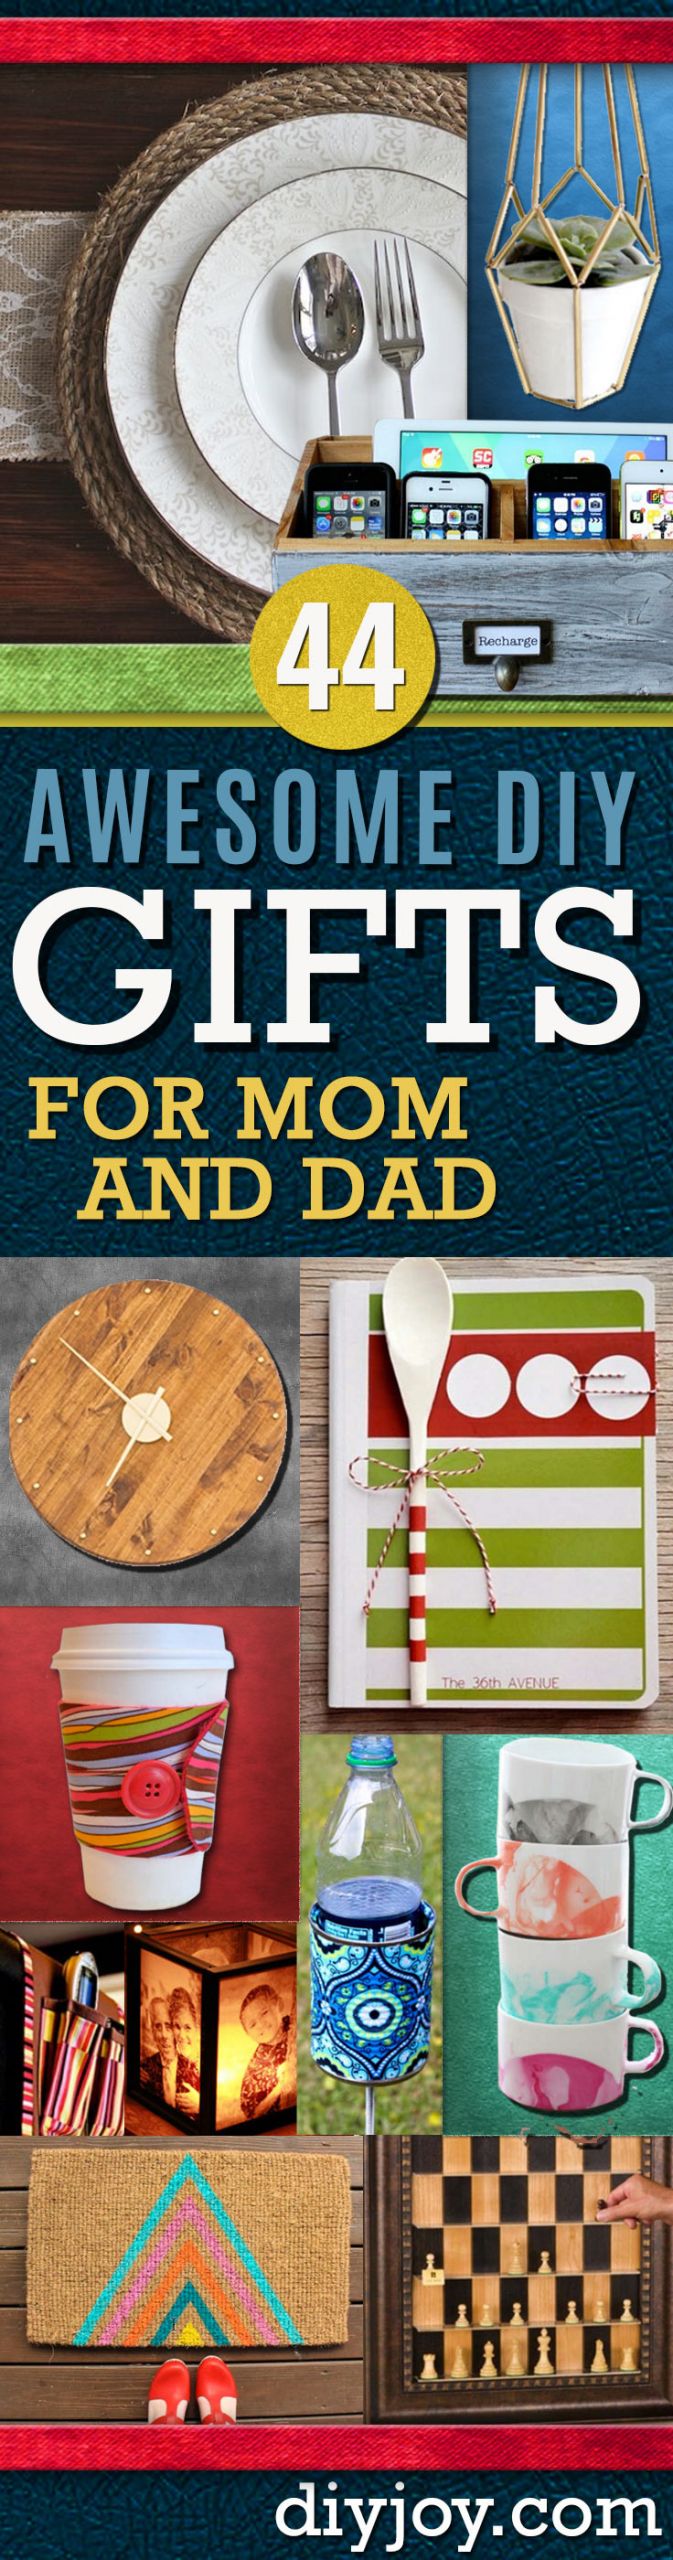 DIY Mom Christmas Gifts
 44 DIY Gift Ideas For Mom and Dad